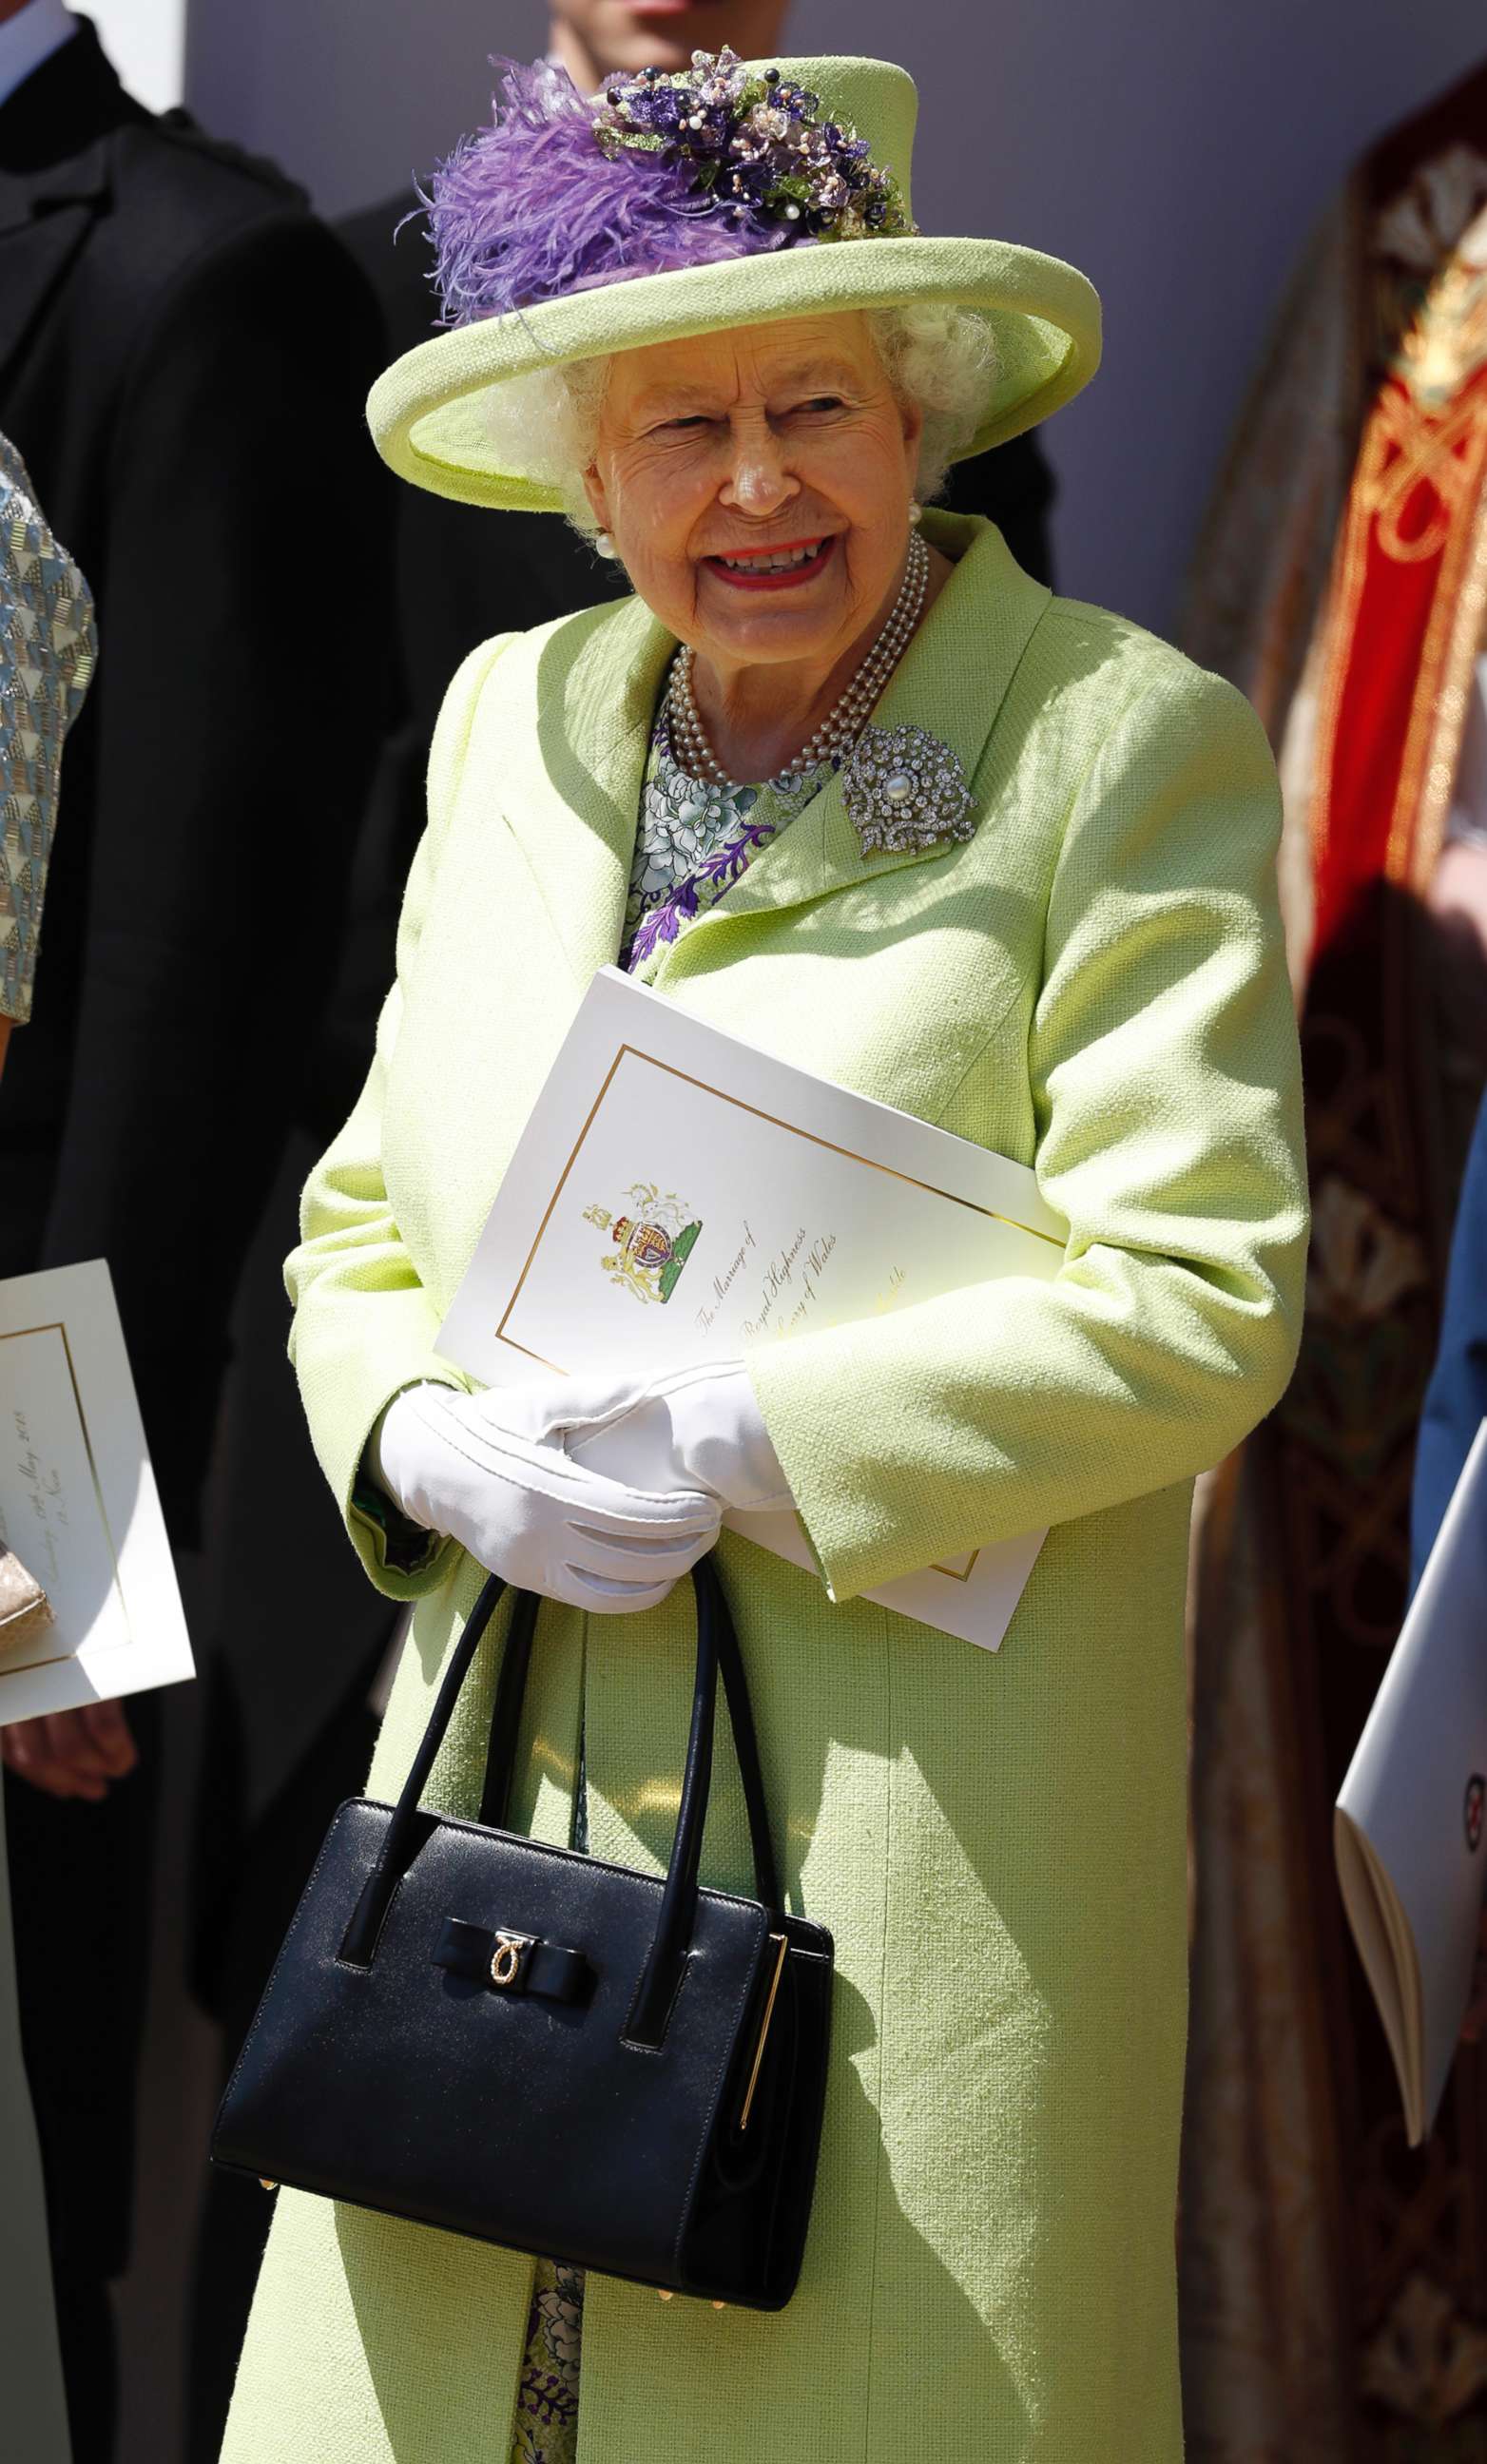 PHOTO: Queen Elizabeth II smiles after the wedding of Prince Harry and Meghan Markle at St. George's Chapel at Windsor Castle on May 19, 2018, in Windsor, England.